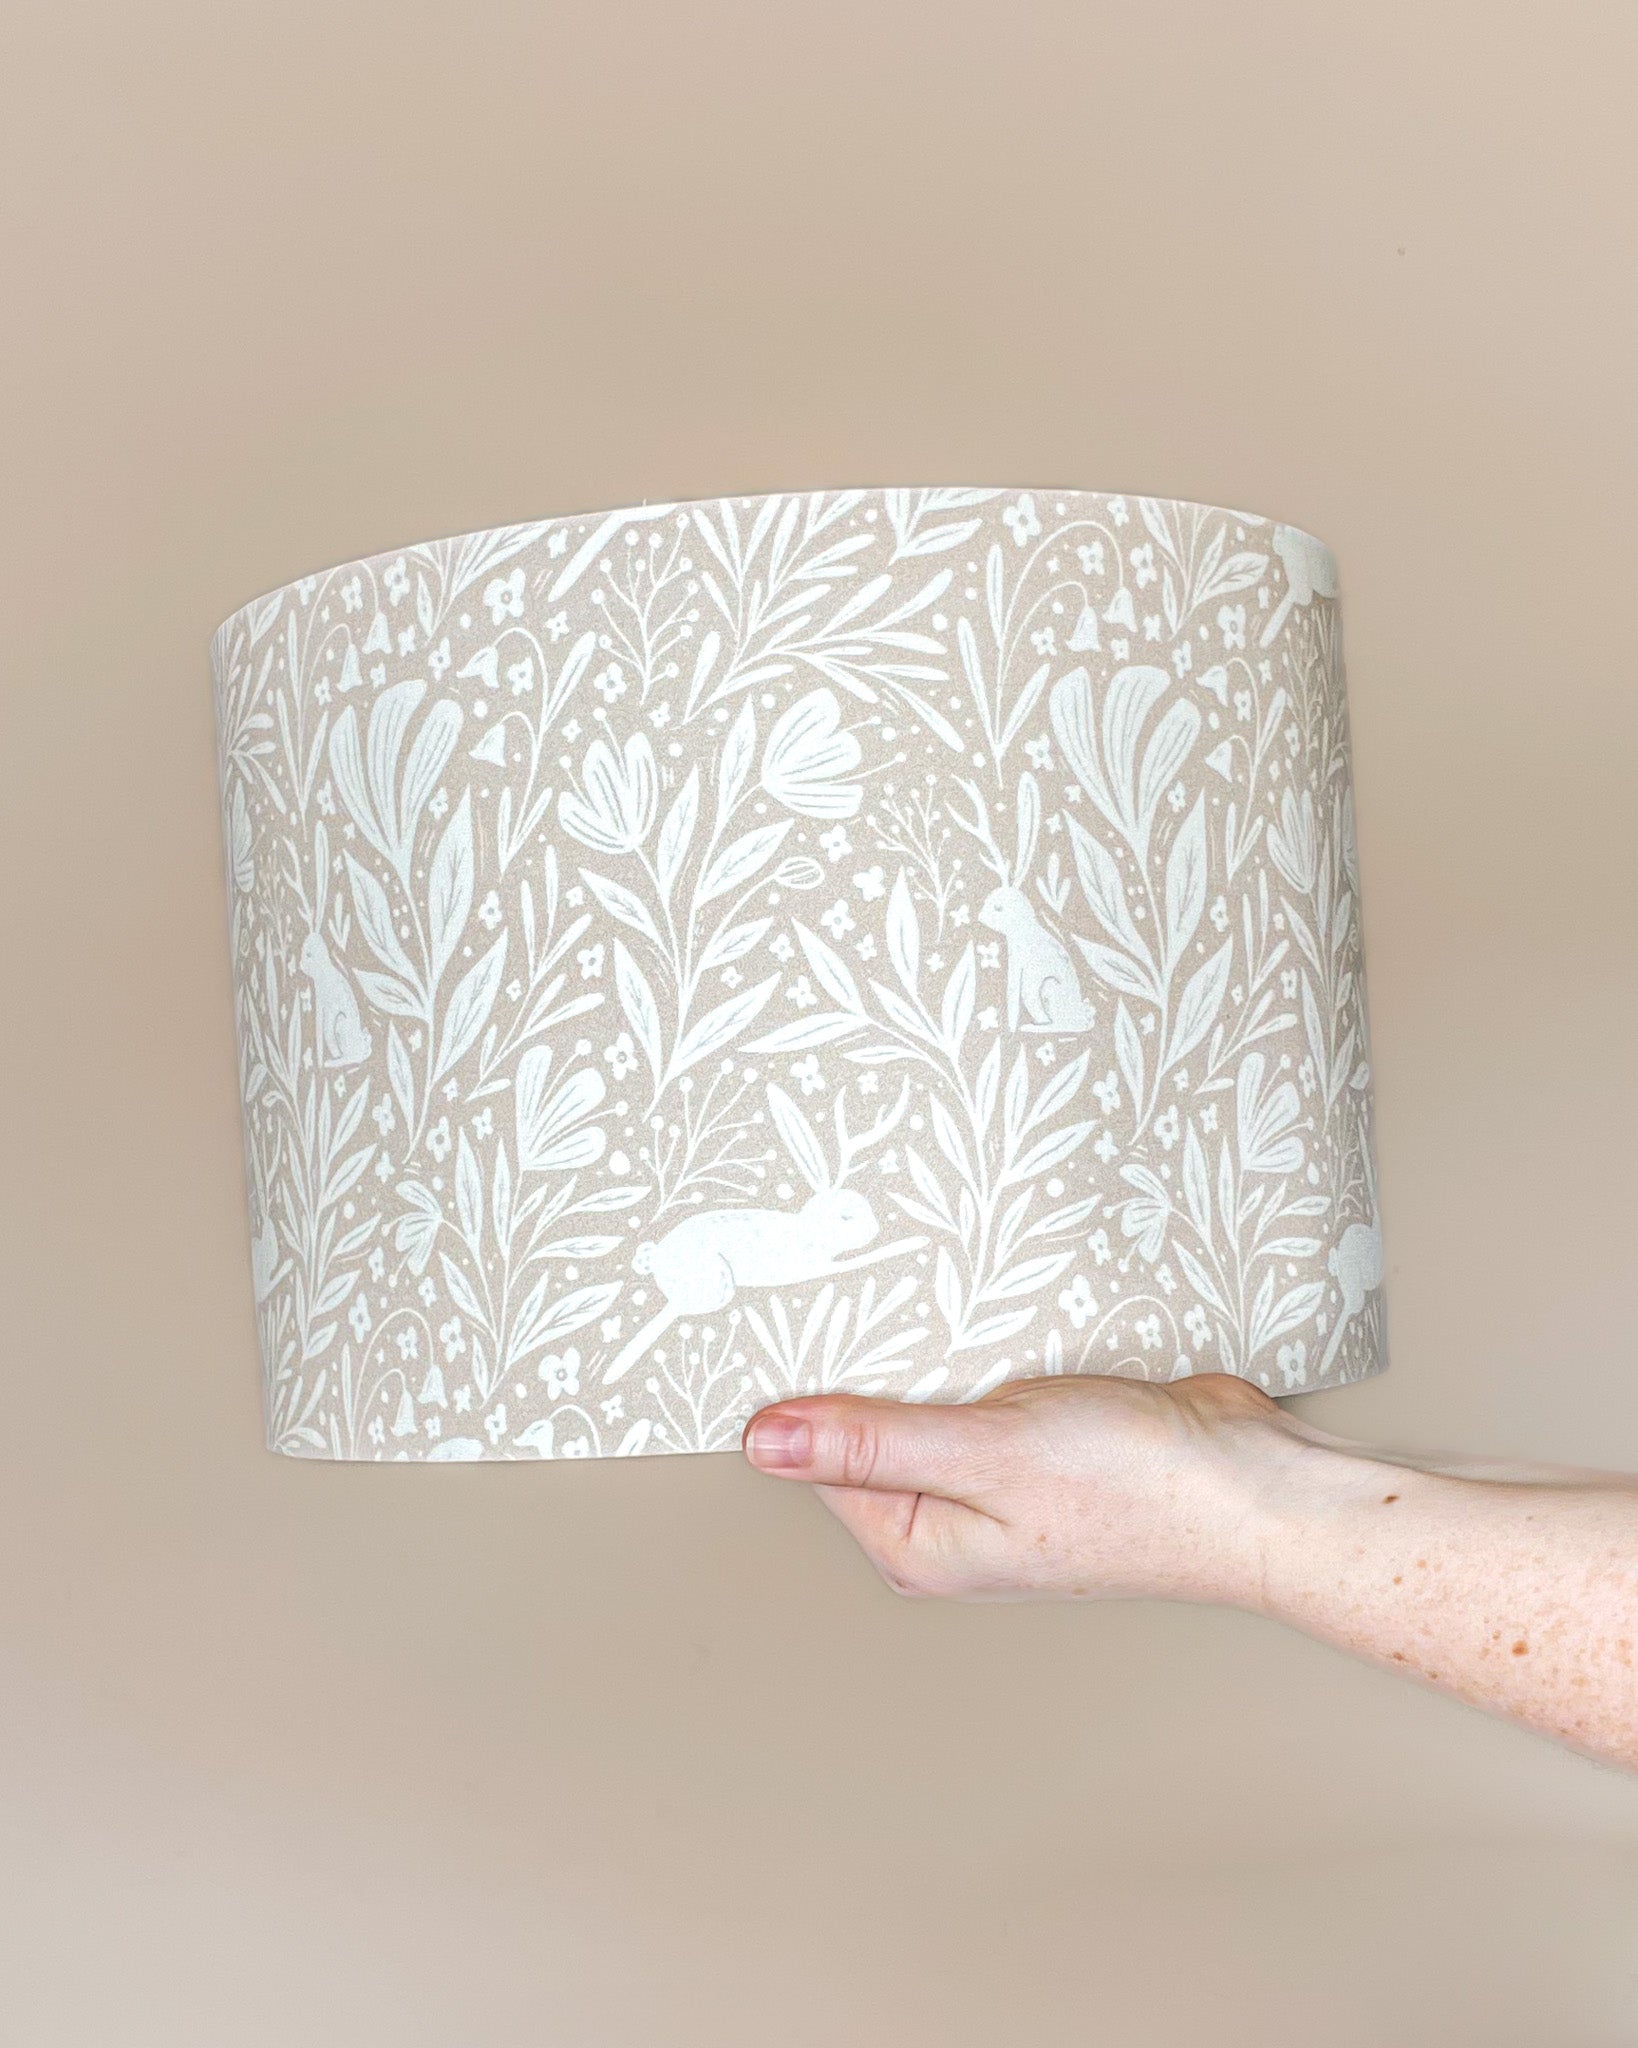 Whispering Woodlands drum lampshade with enchanting hares among woodland flowers in white, set against a light delicate pink background.